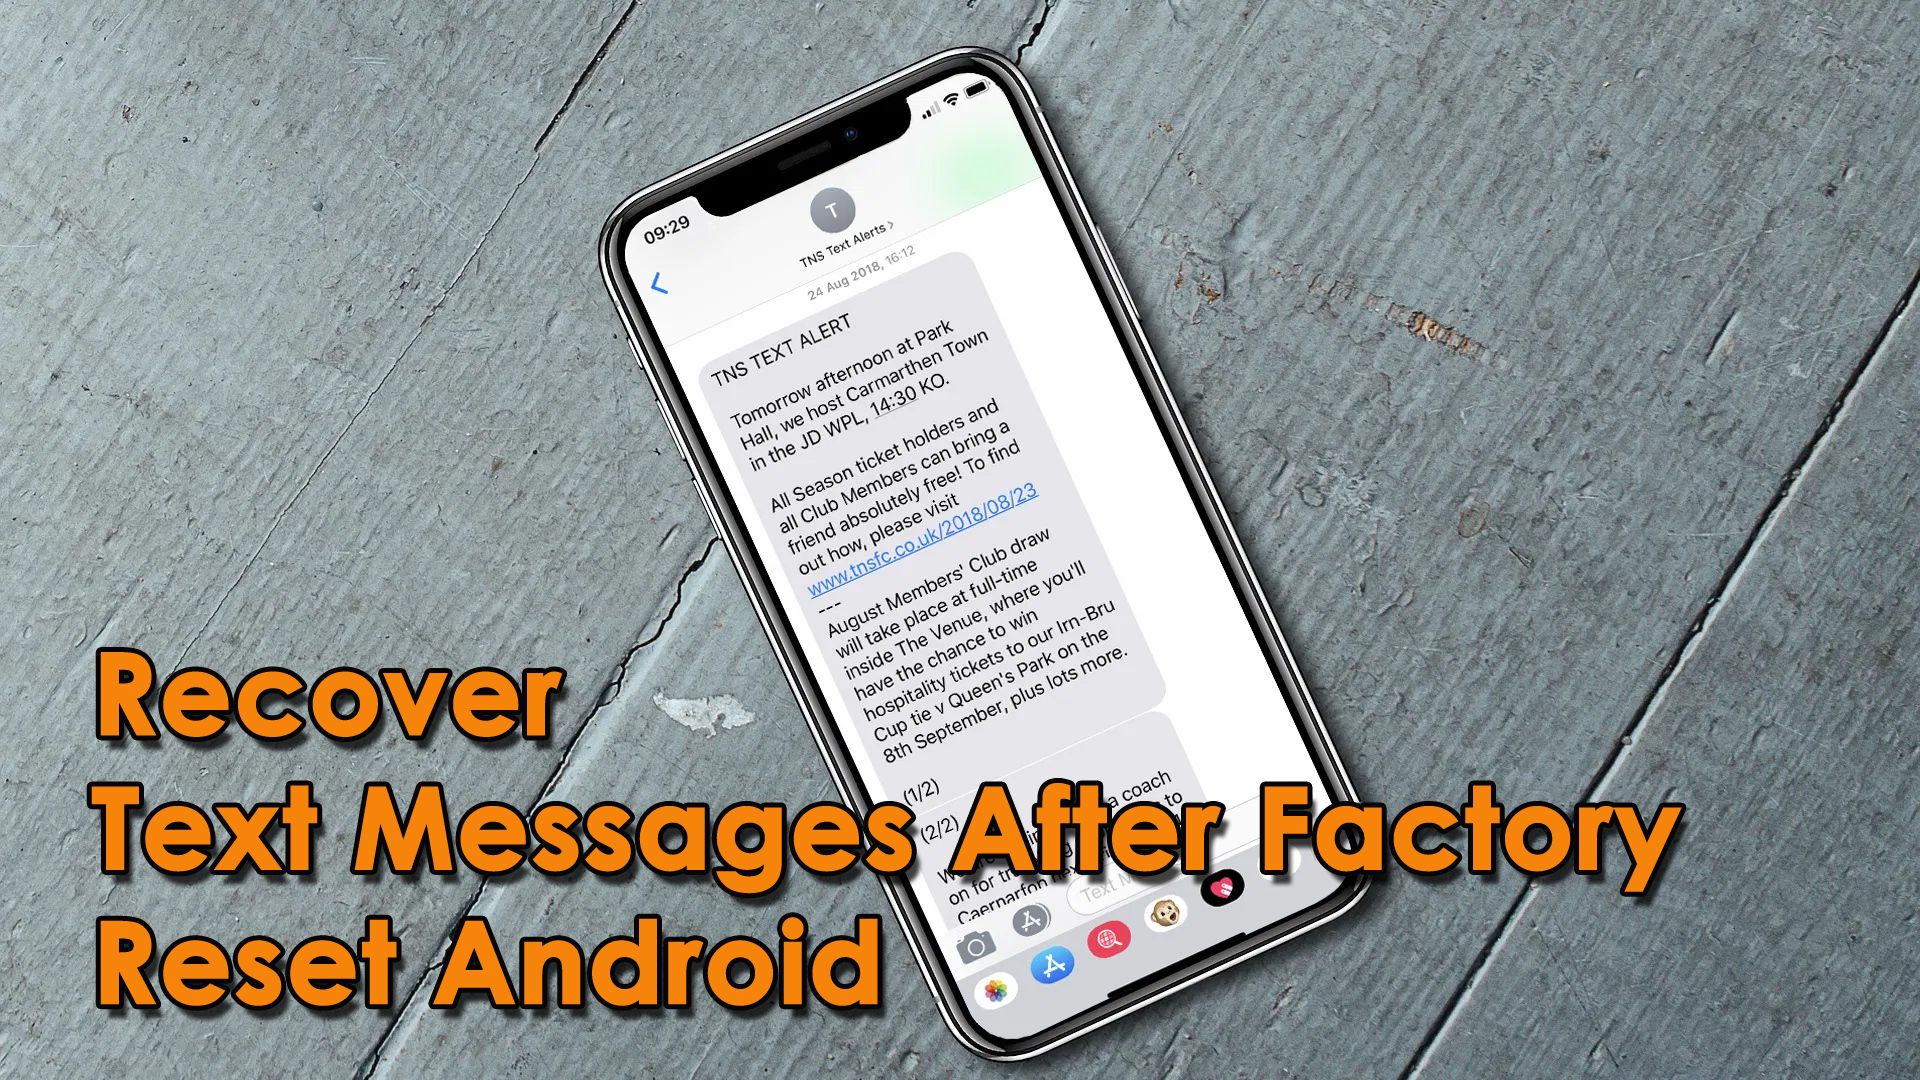 [5 Methods]- How To Recover Text Messages After Factory Reset Android